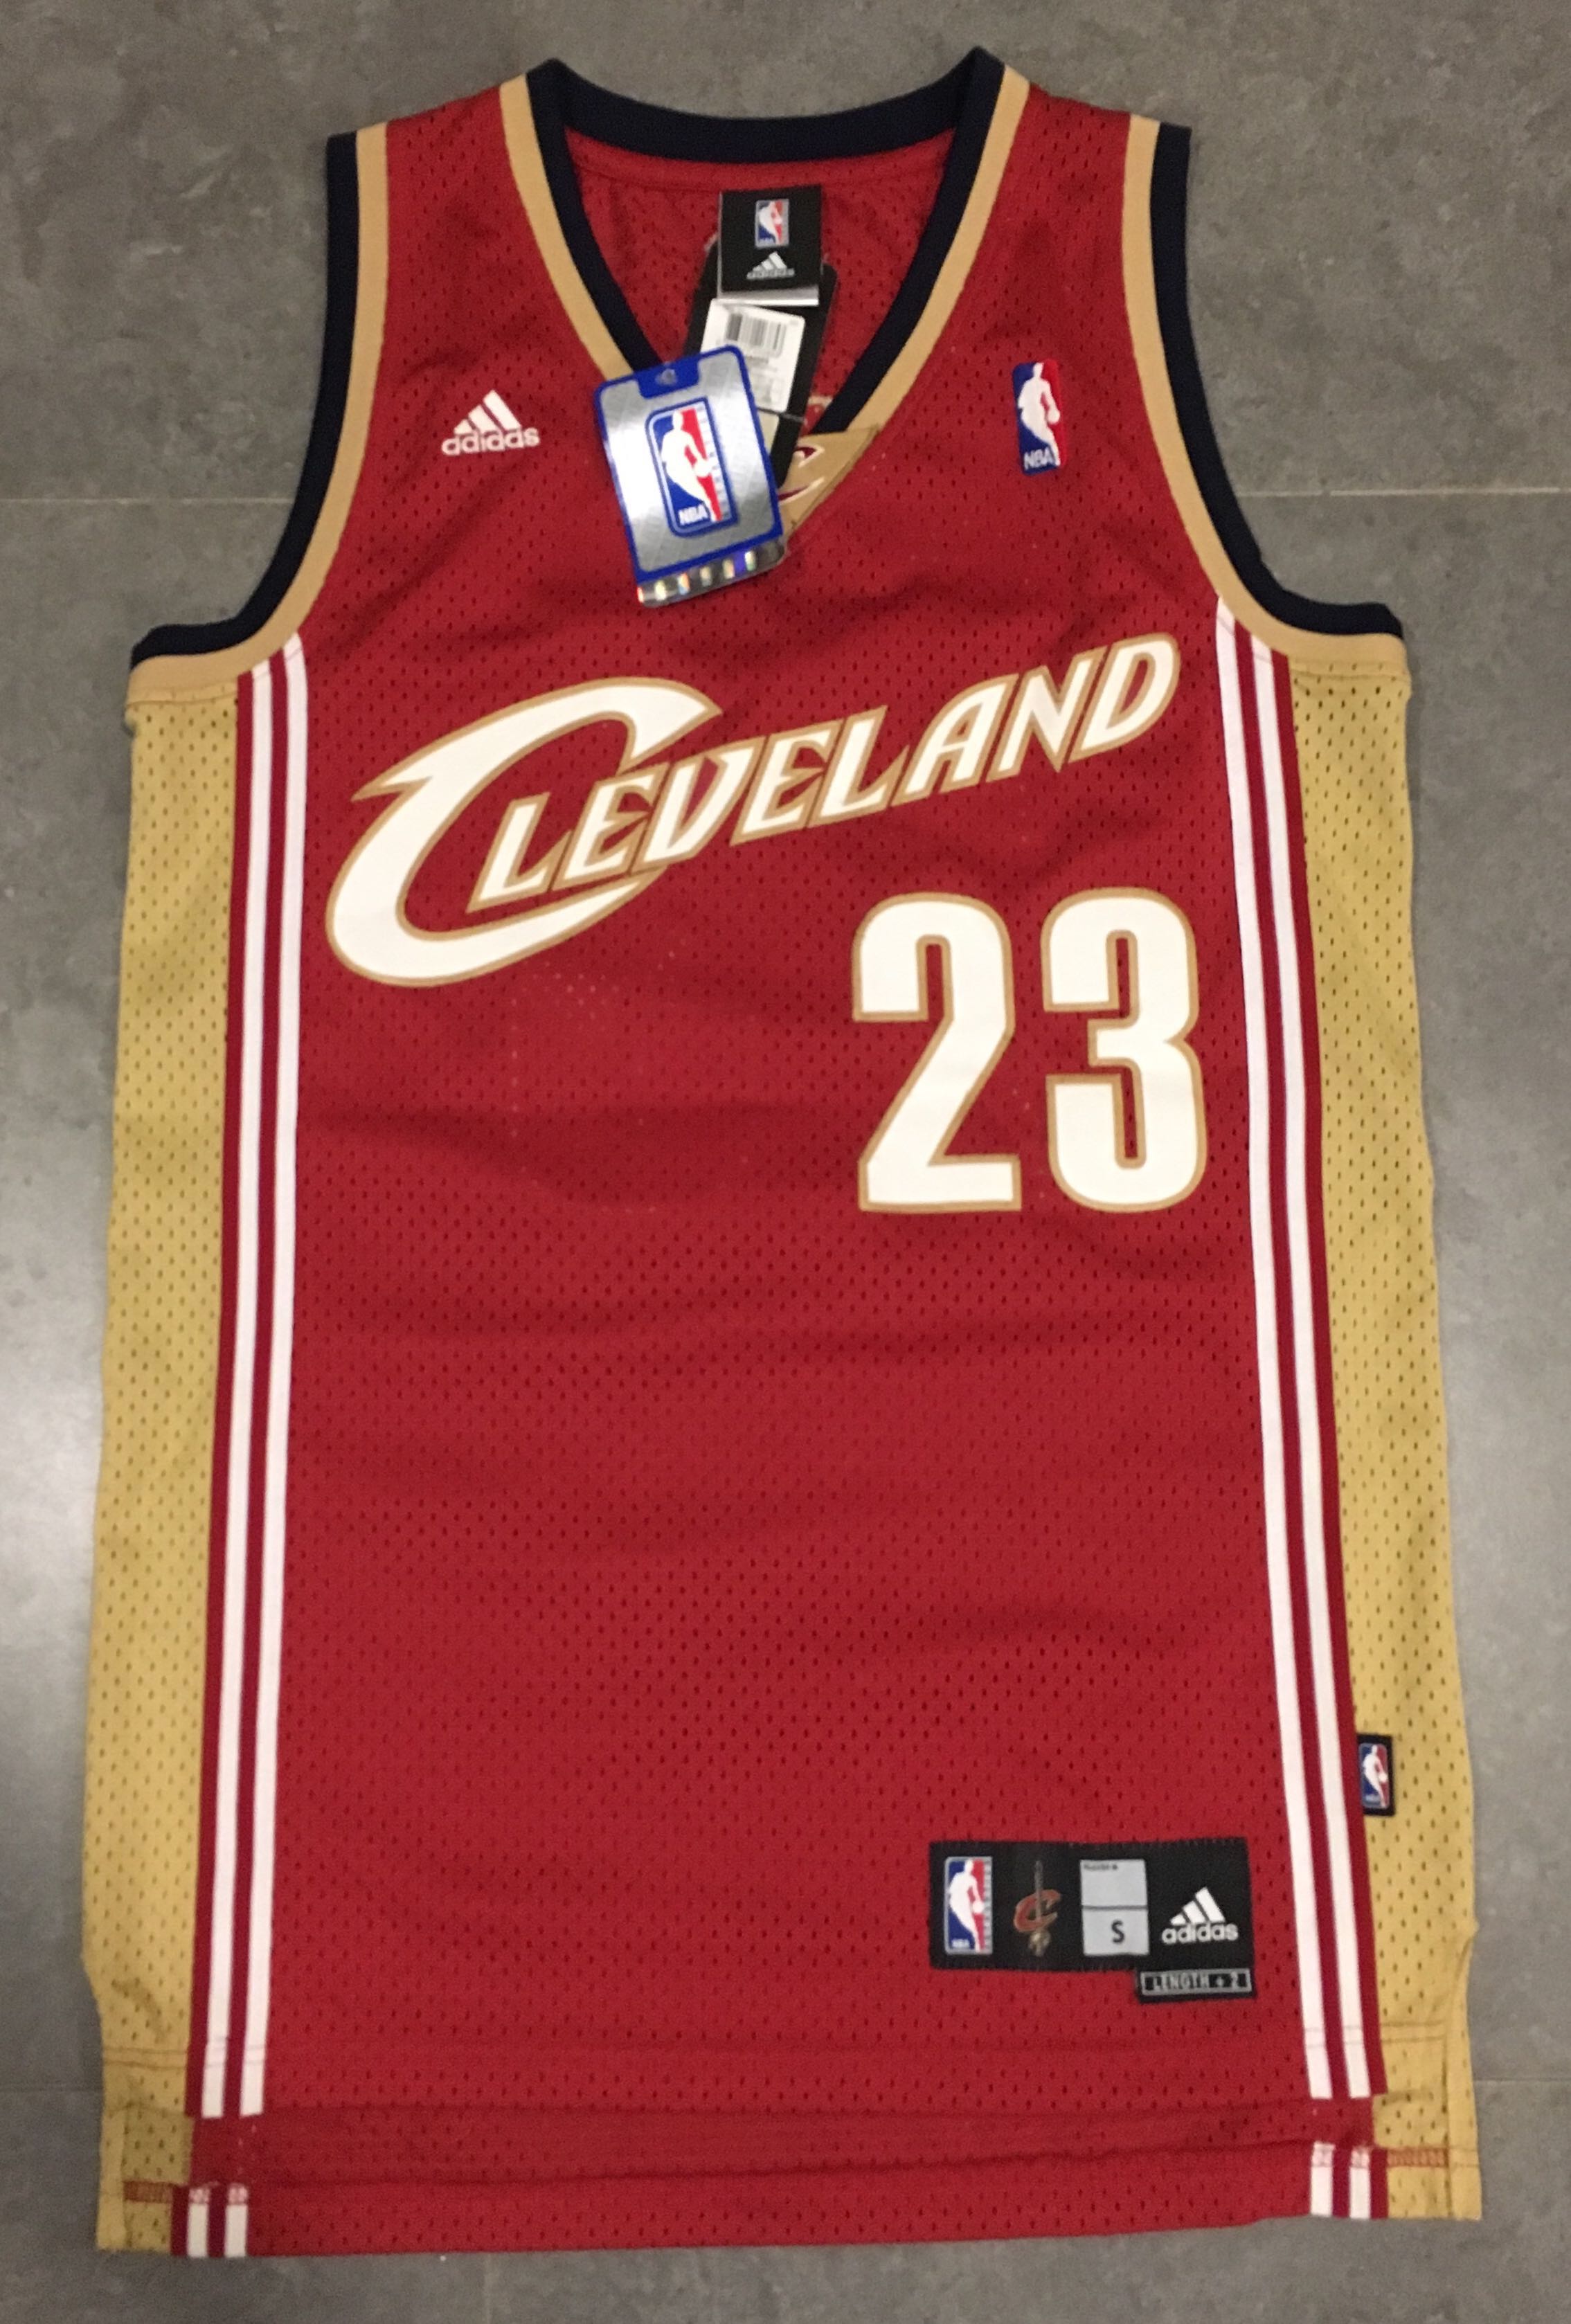 LeBron James Rookie Jersey Hits Auction Block, Could Break $630k Record